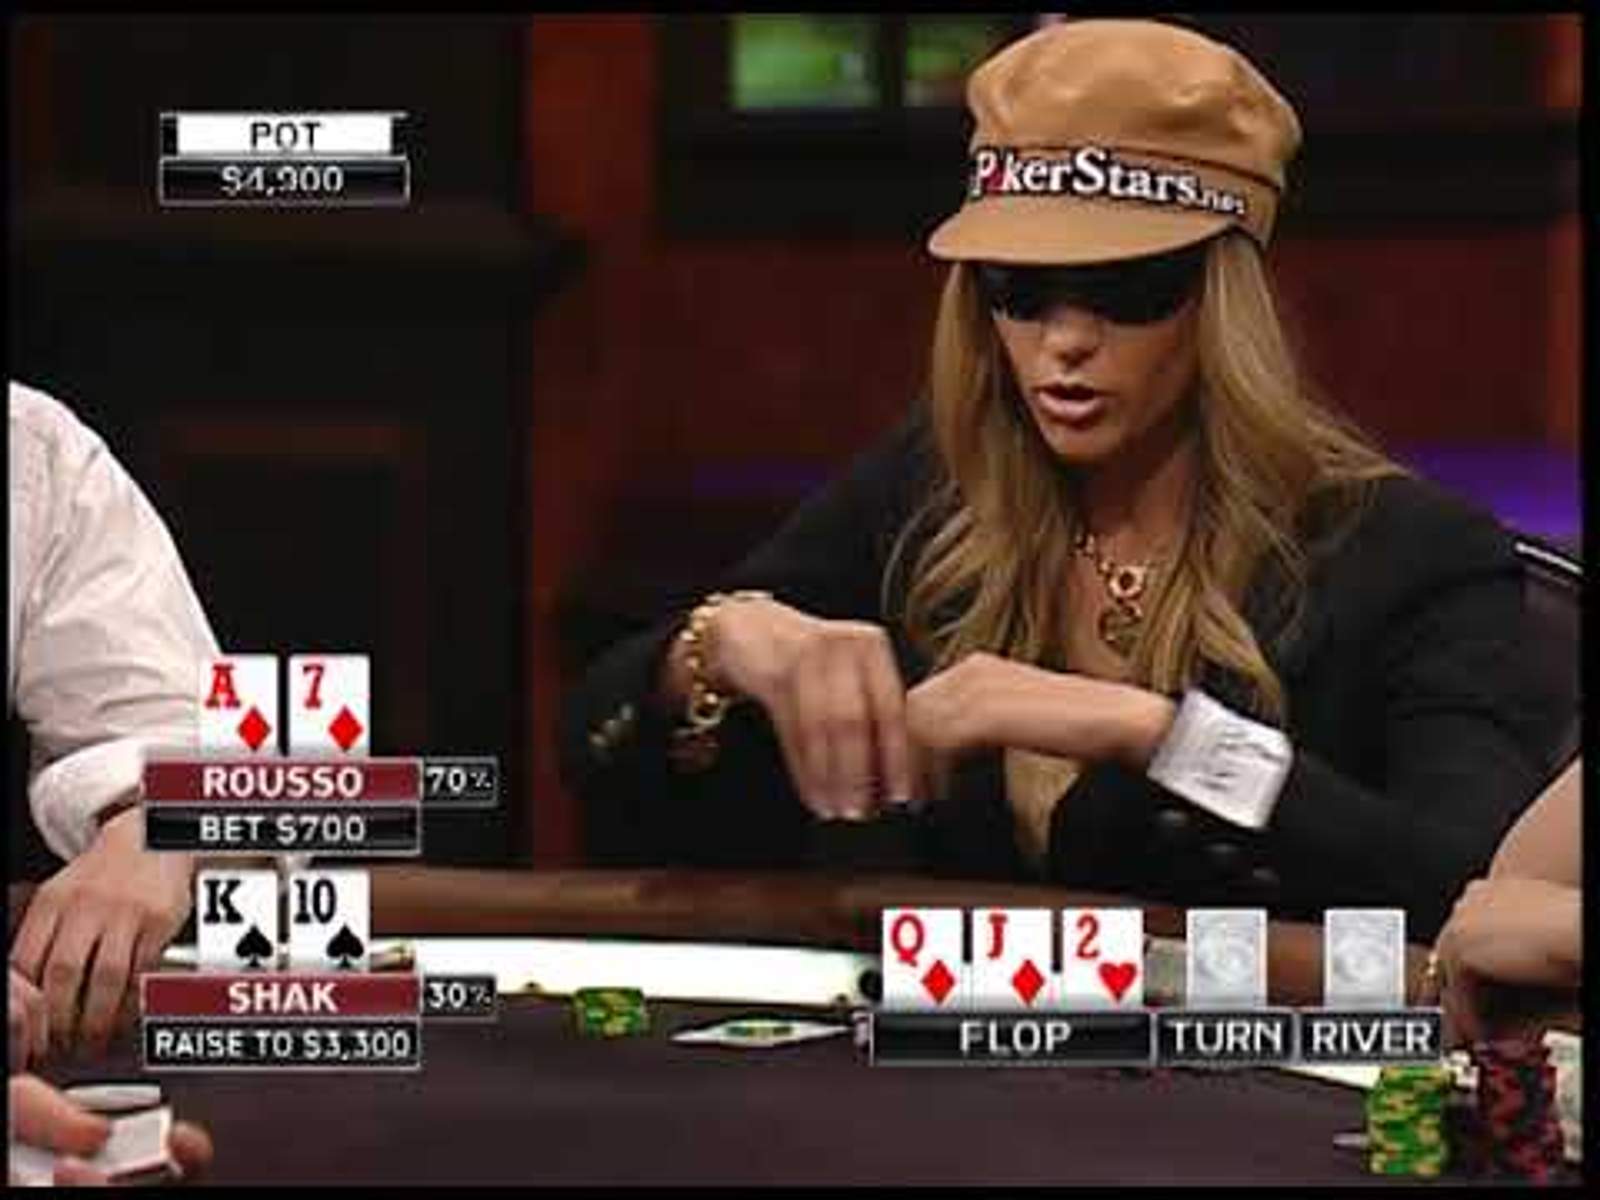 Throwback Hands: Battle of Draws Leads to Win for Vanessa Rousso